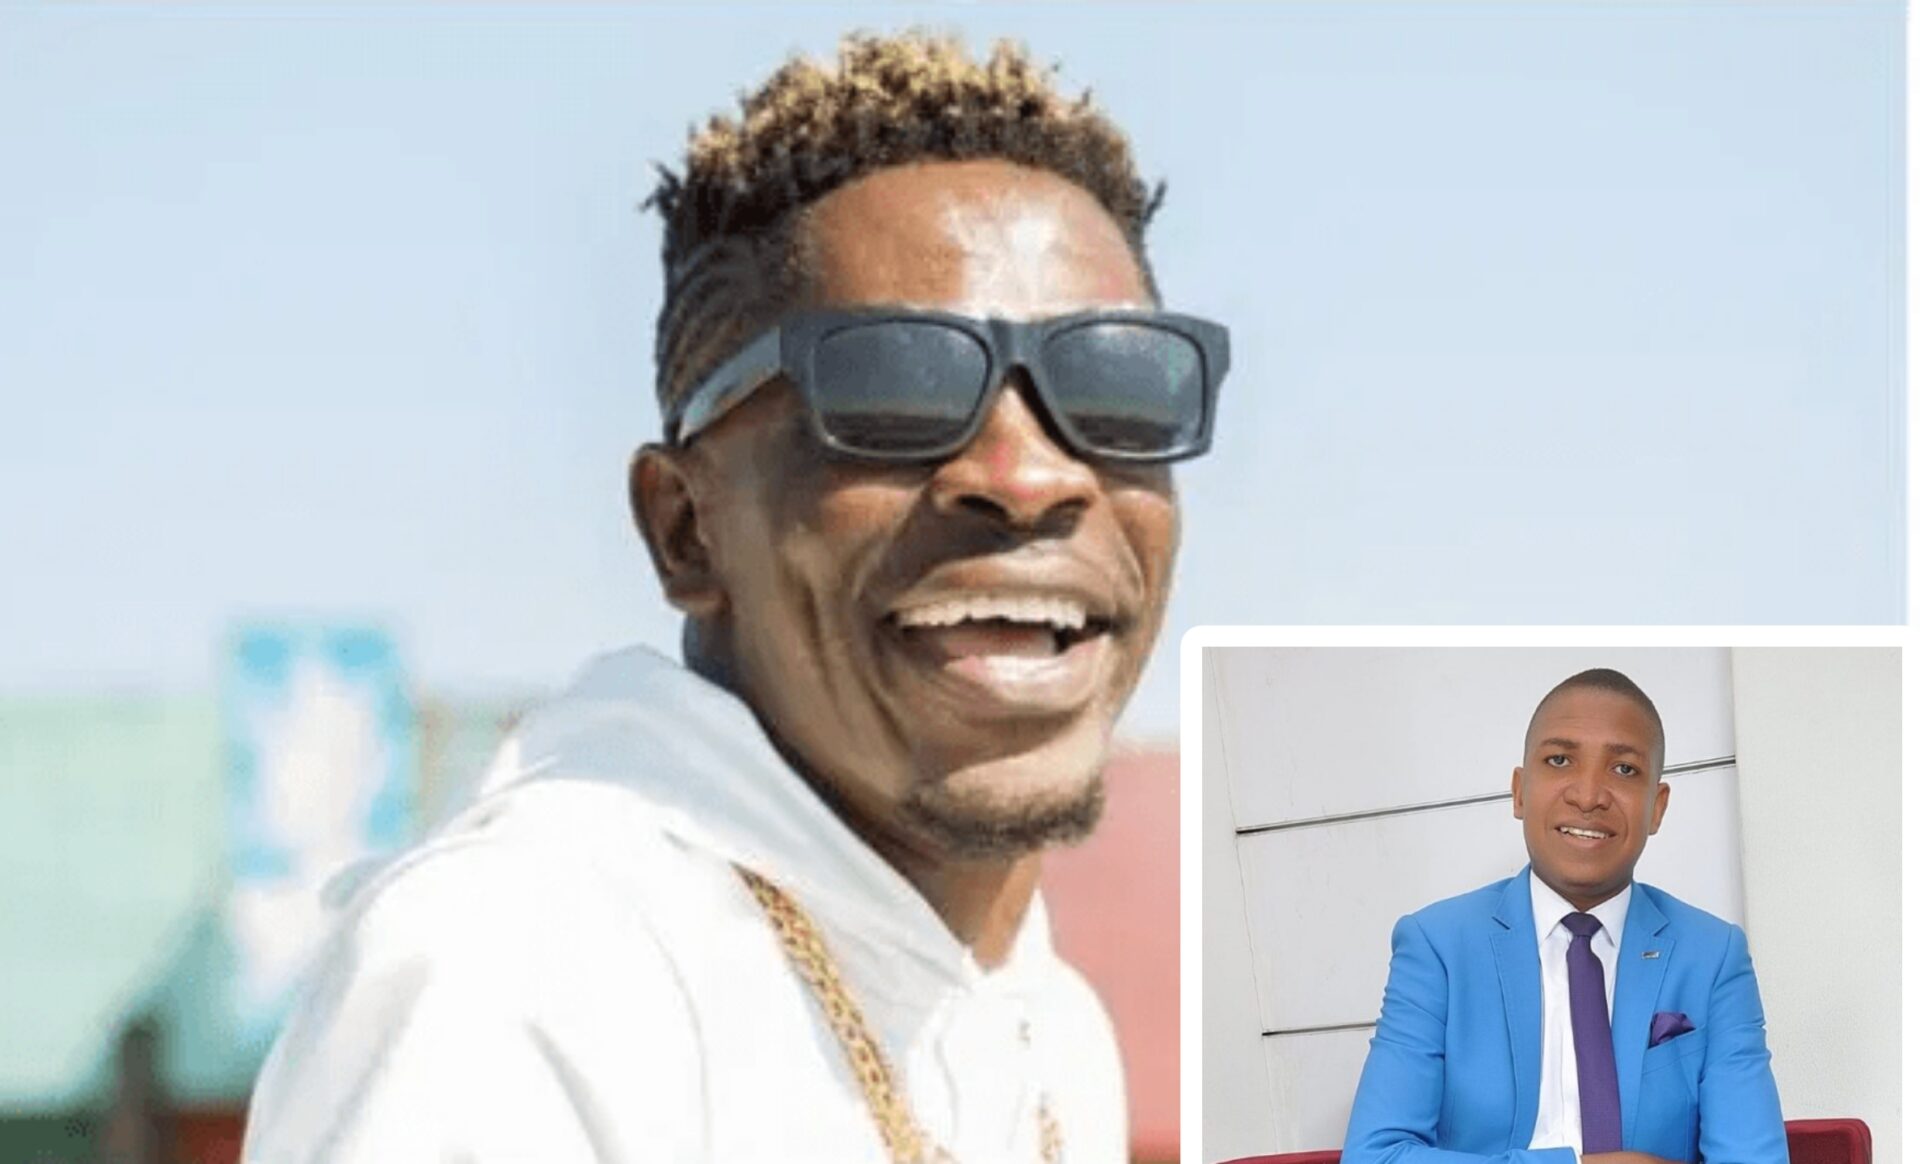 Counselor Adofoli suggests Shatta Wale should include a psychologist or therapist in his team